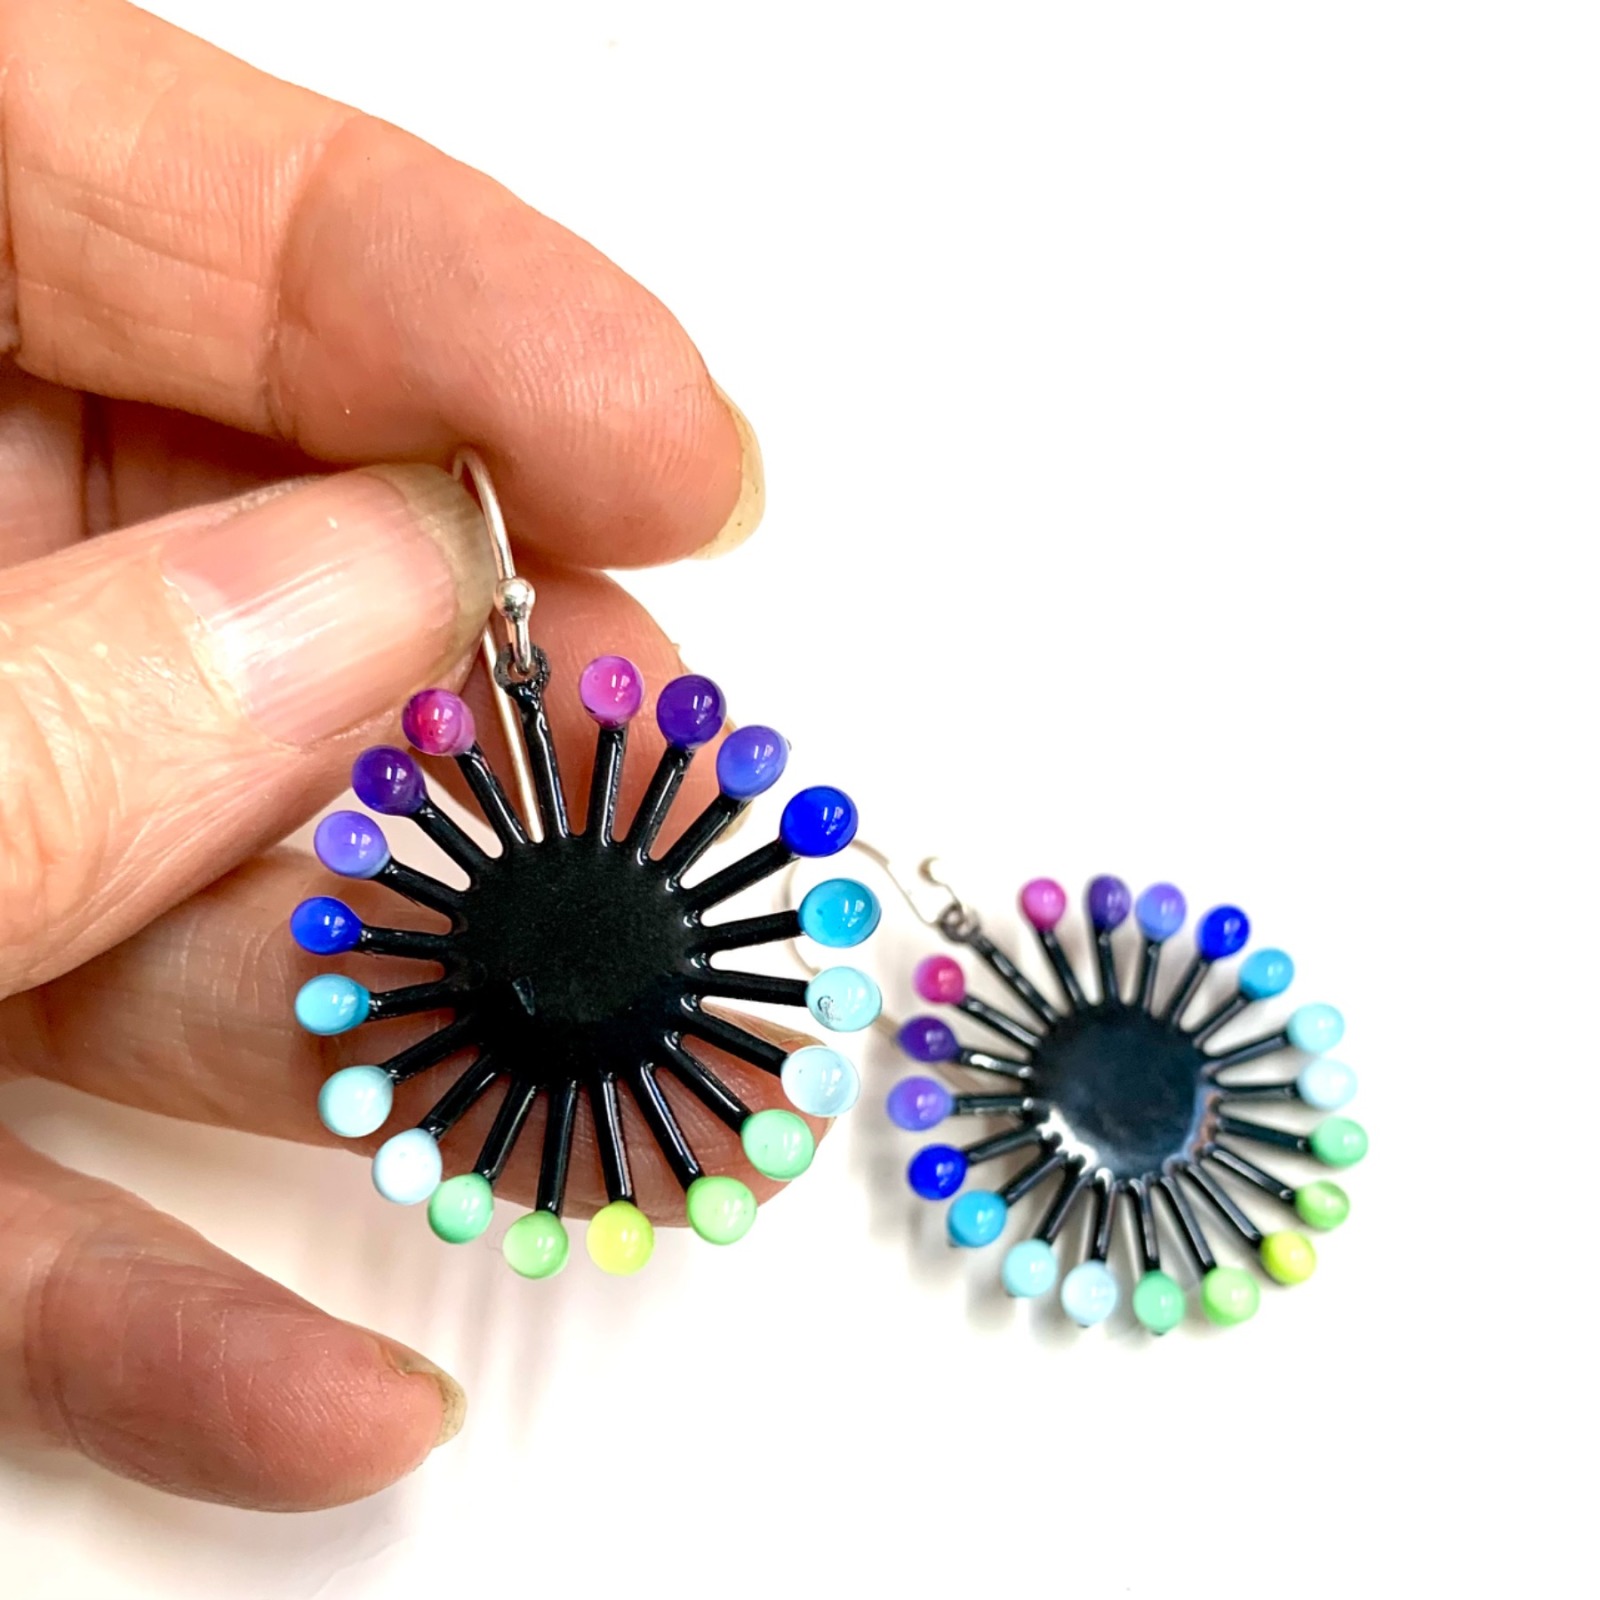 Earring Charm - Bright Rainbow Colored Dots of Glass on Black Enamel 3